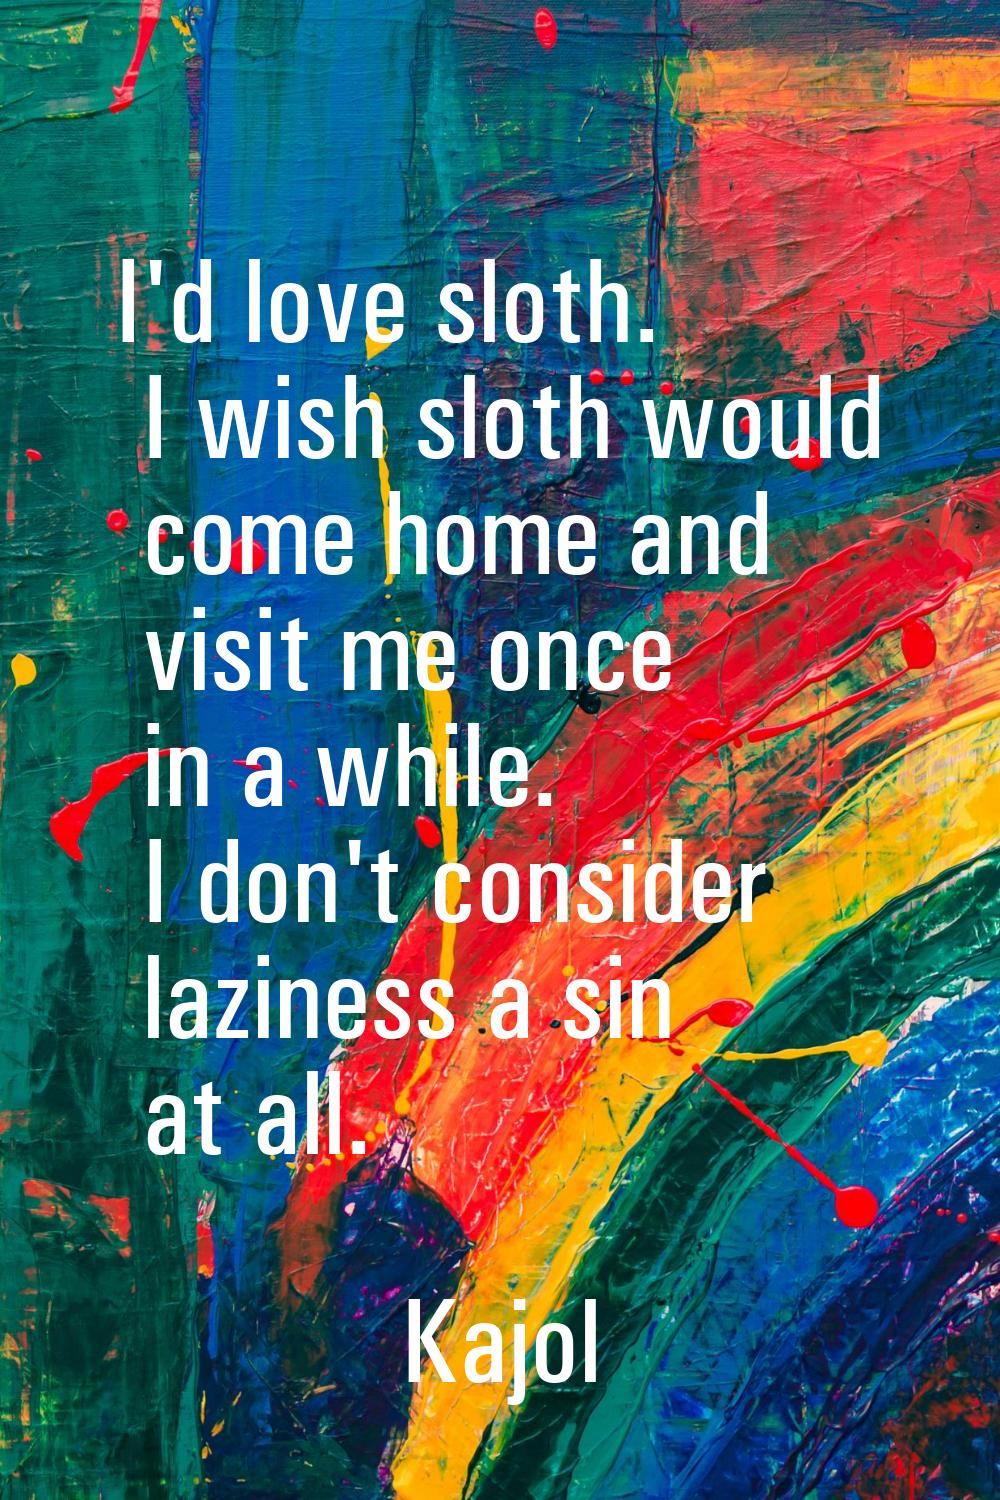 I'd love sloth. I wish sloth would come home and visit me once in a while. I don't consider lazines